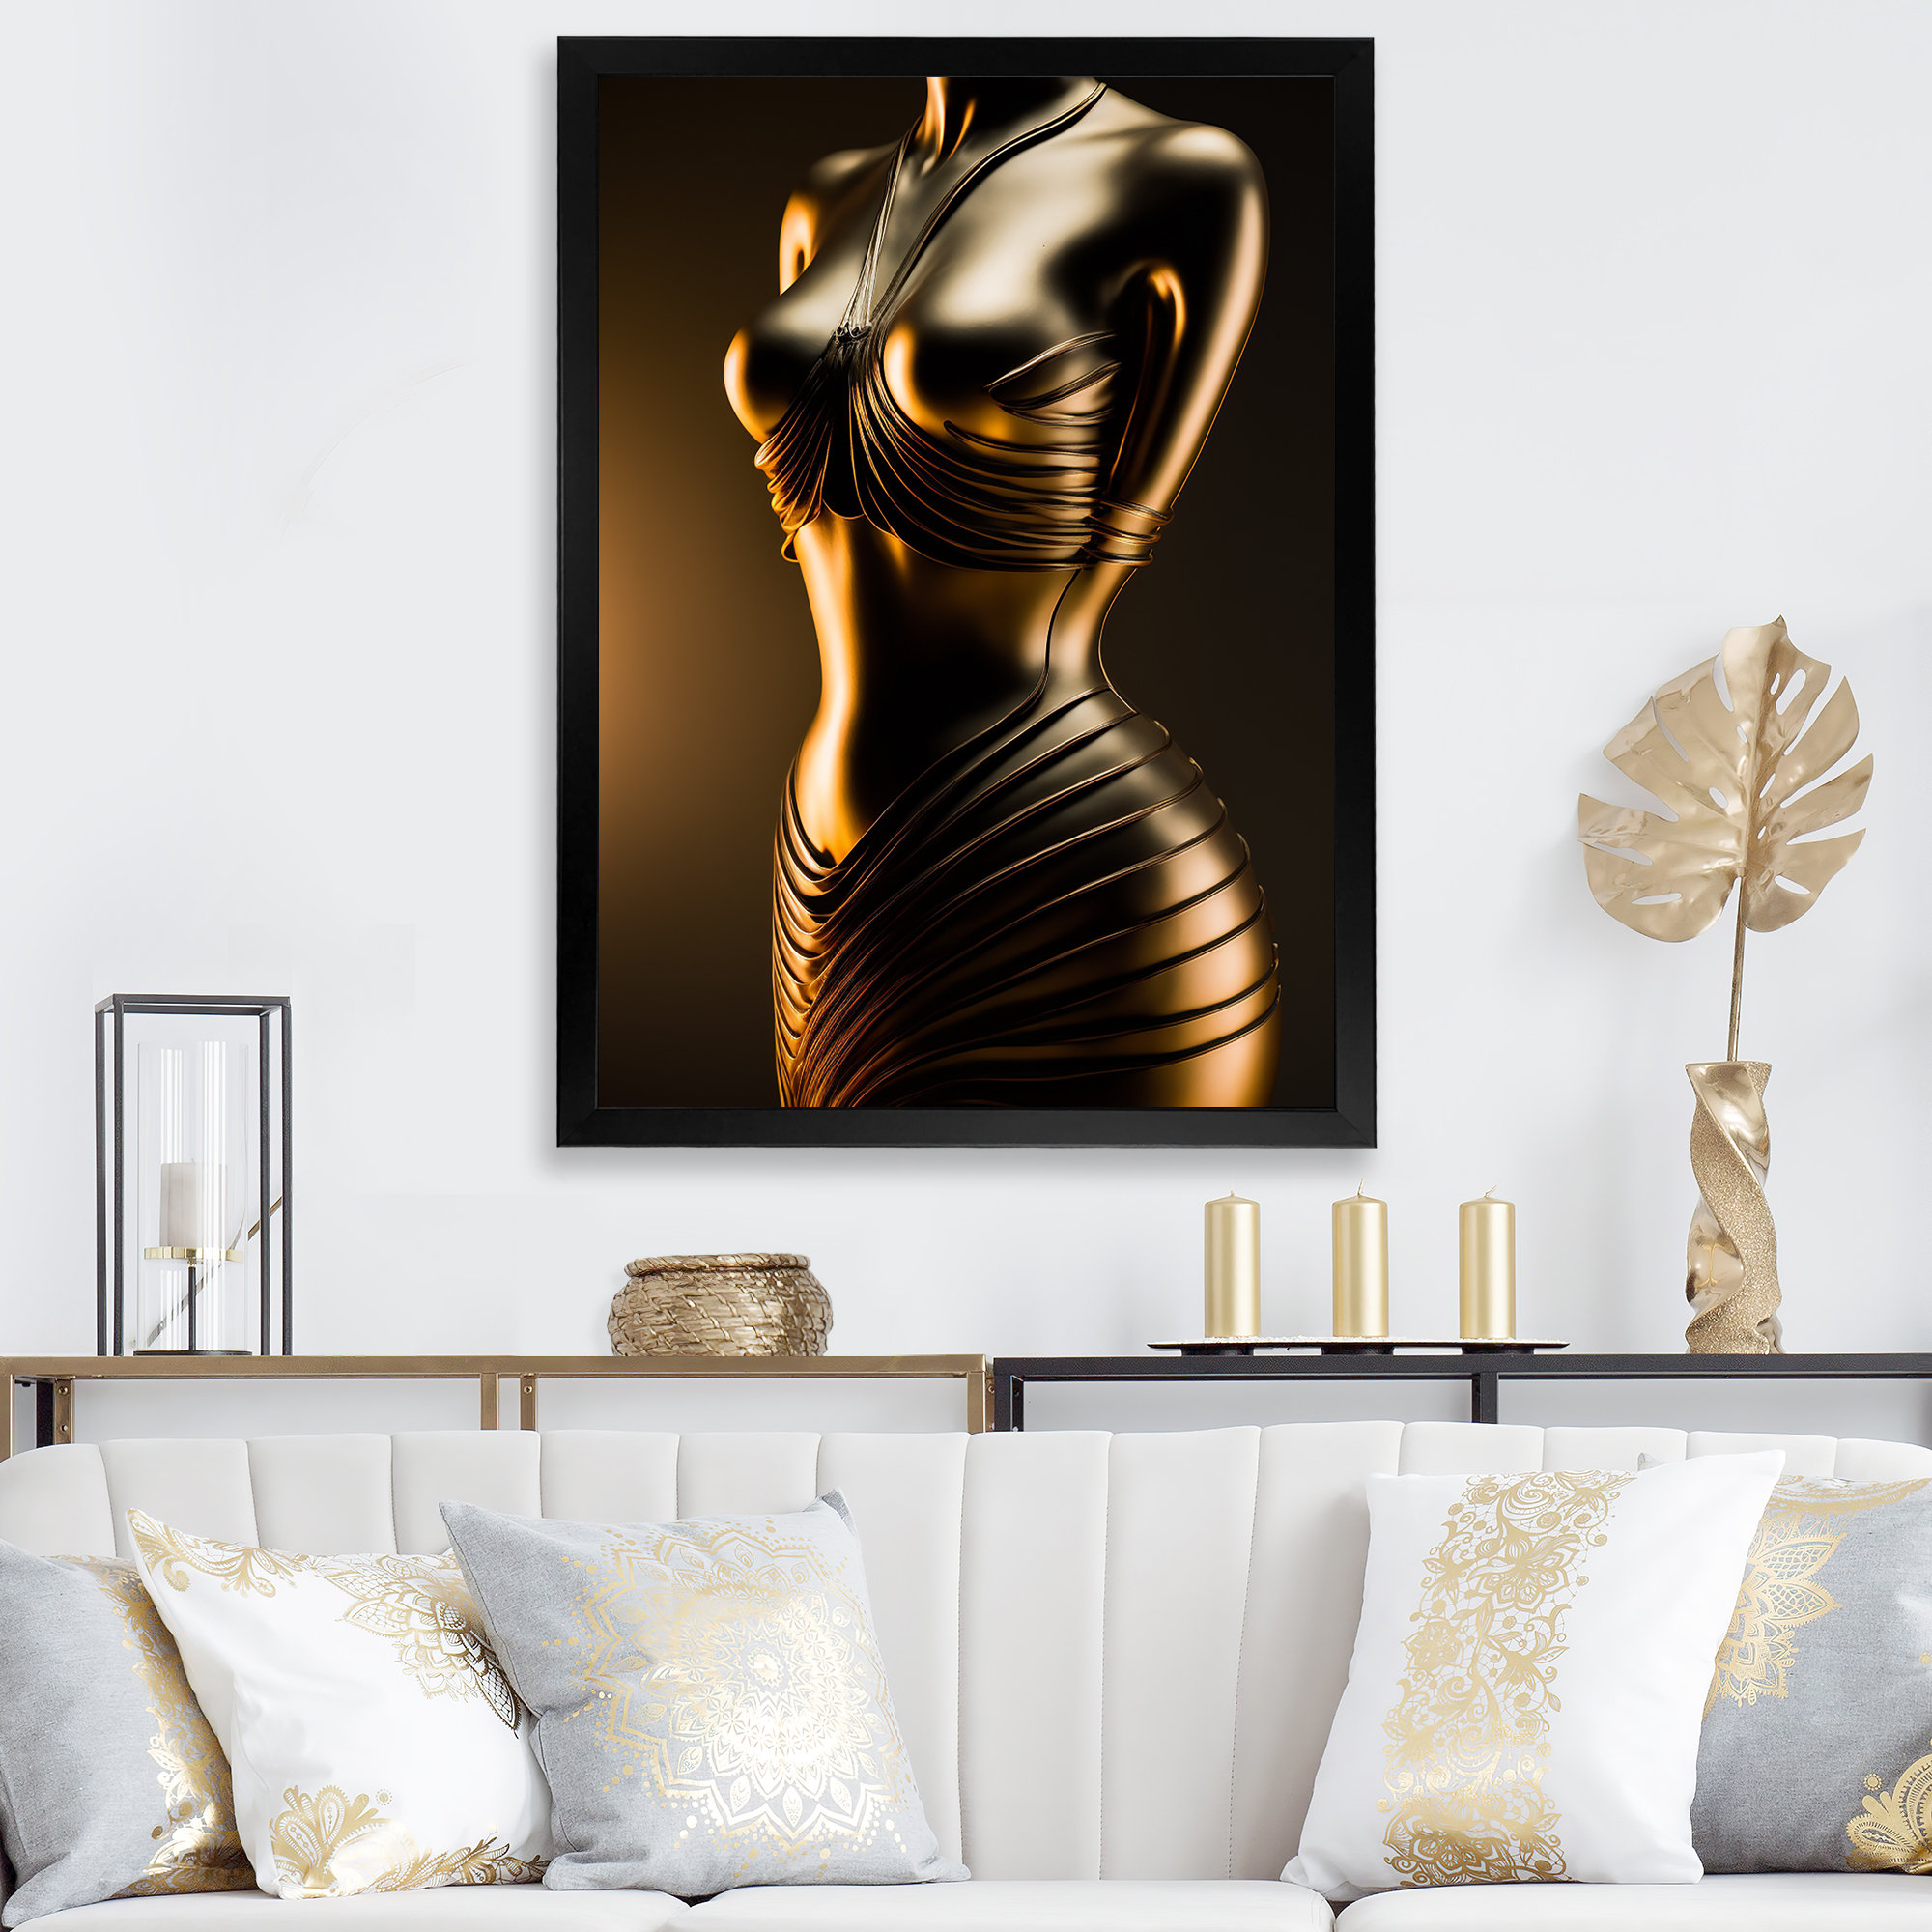 Louviere - Print on Canvas Willa Arlo Interiors Format: Black Floater Framed Canvas, Size: 40 H x 30 W x 1.5 D